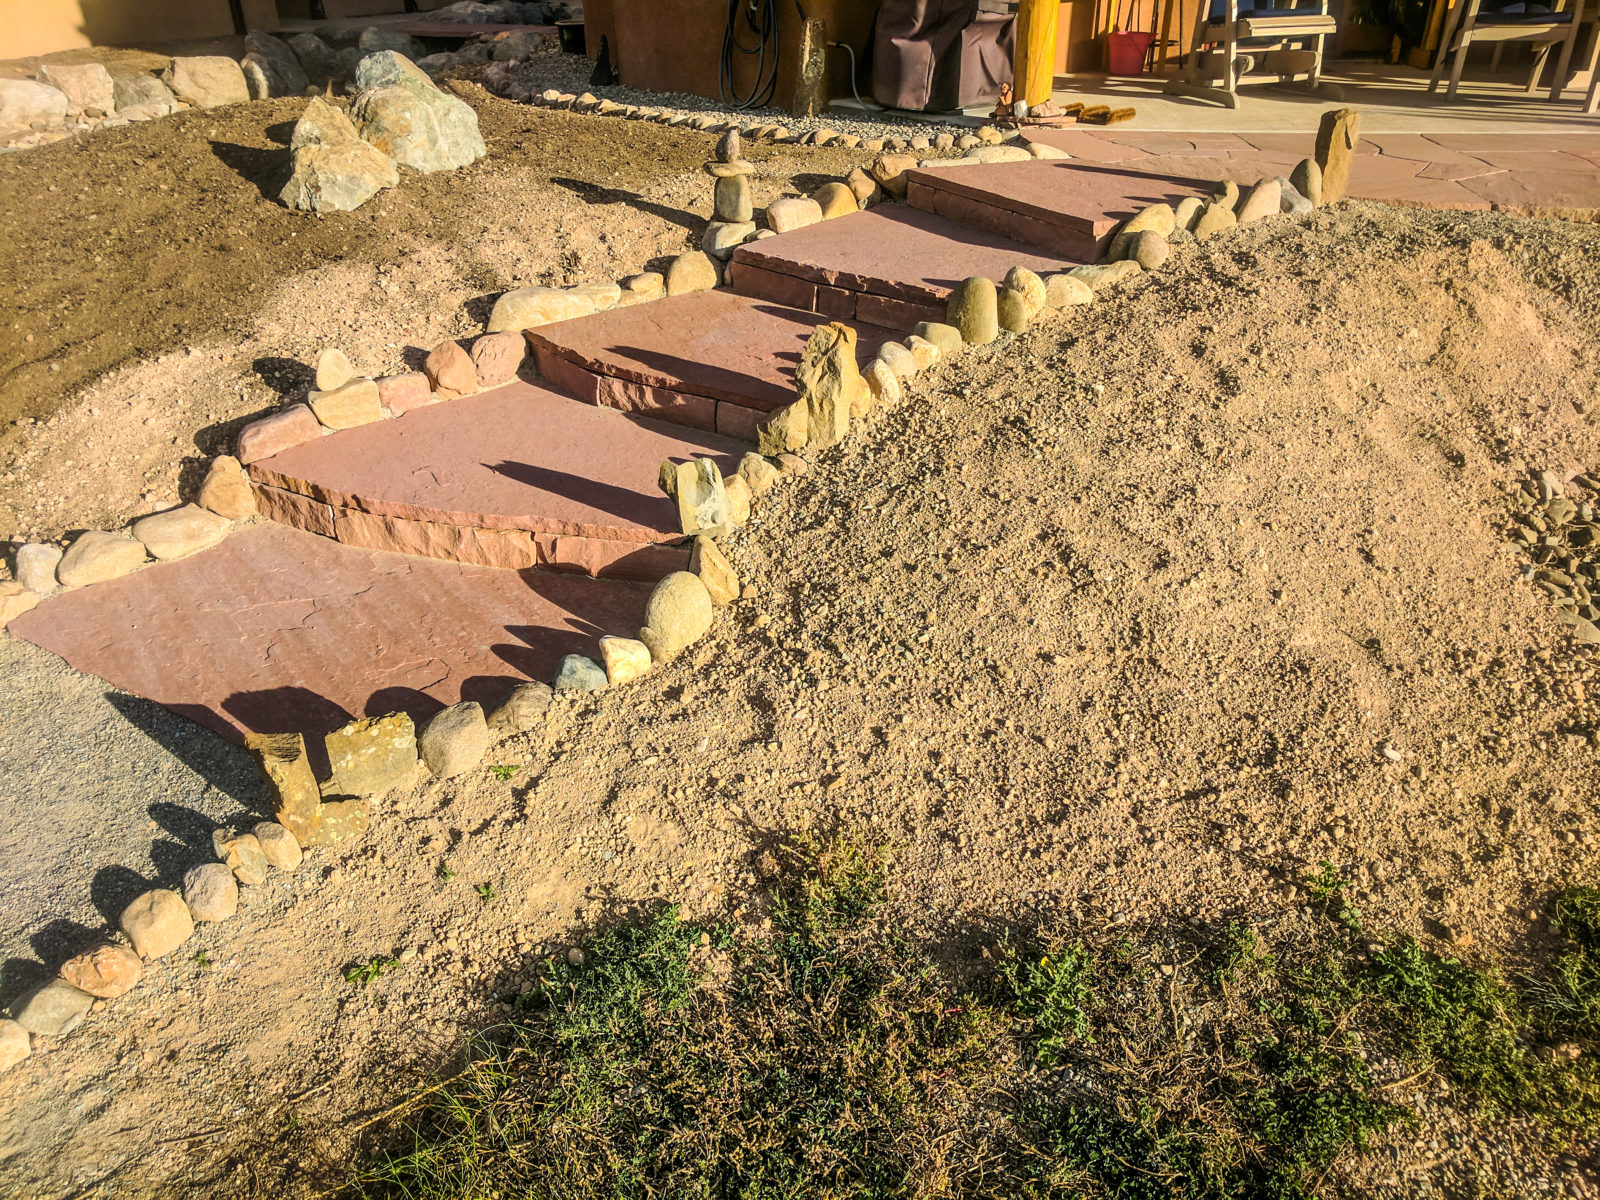 Stone steps leading up to the client's patio in this landscape design Dan created for his client